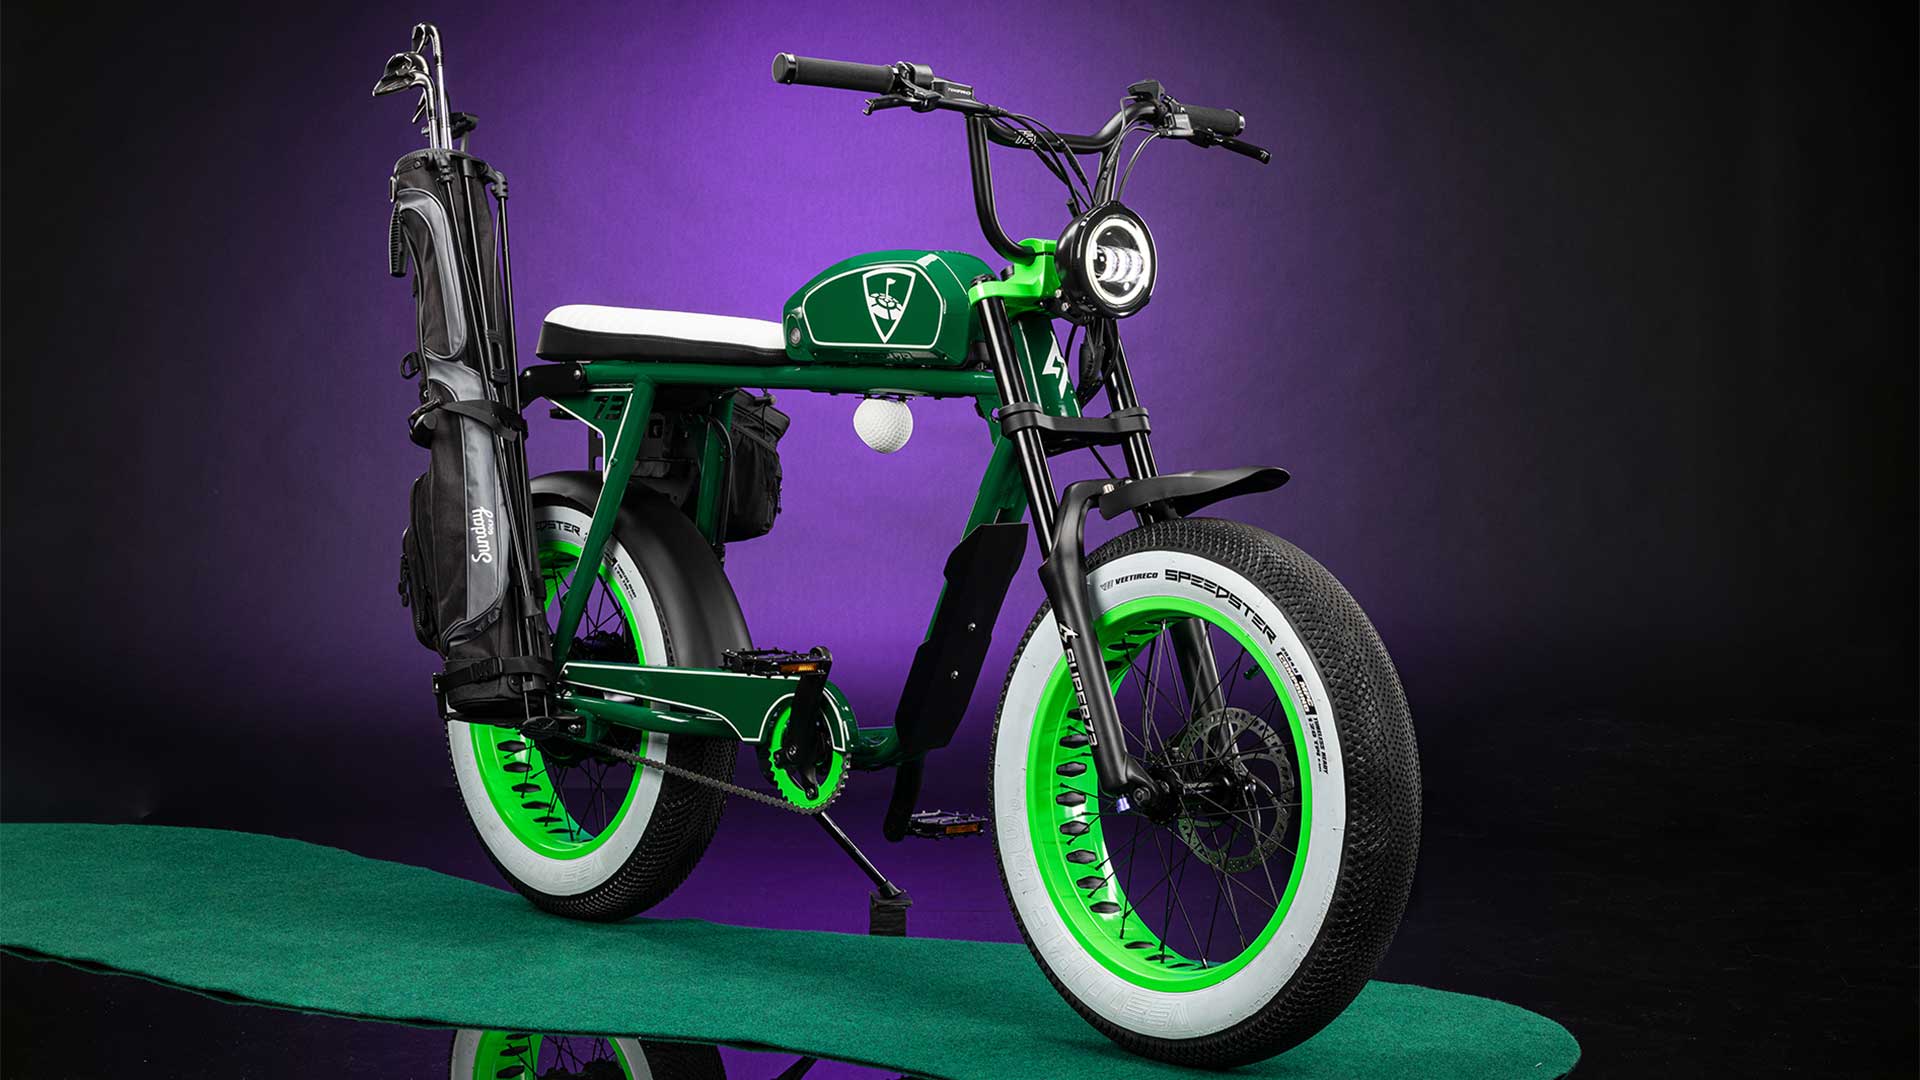 Topgolf collab bike in front of a purple backdrop